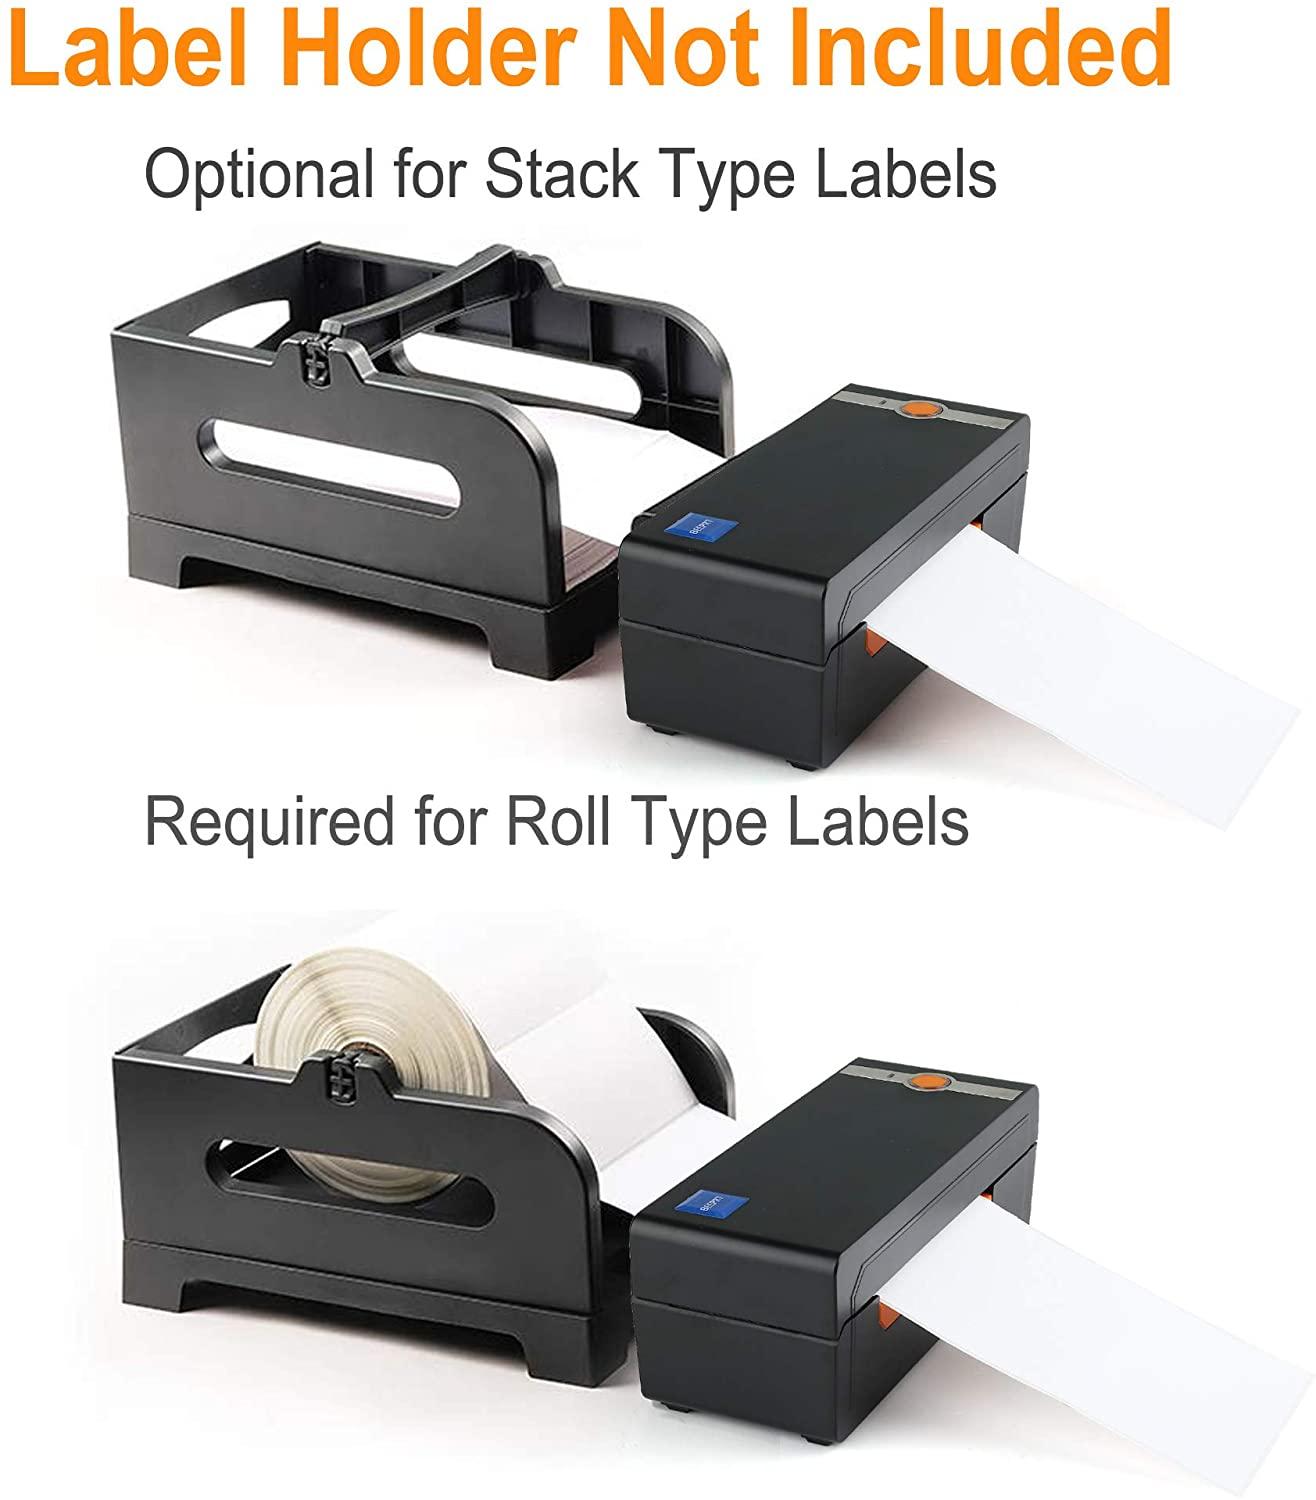 Thermal Barcode Label Printer Support Ebay 4×6 Shipping Label Printer use in iOs Android MAC Windows